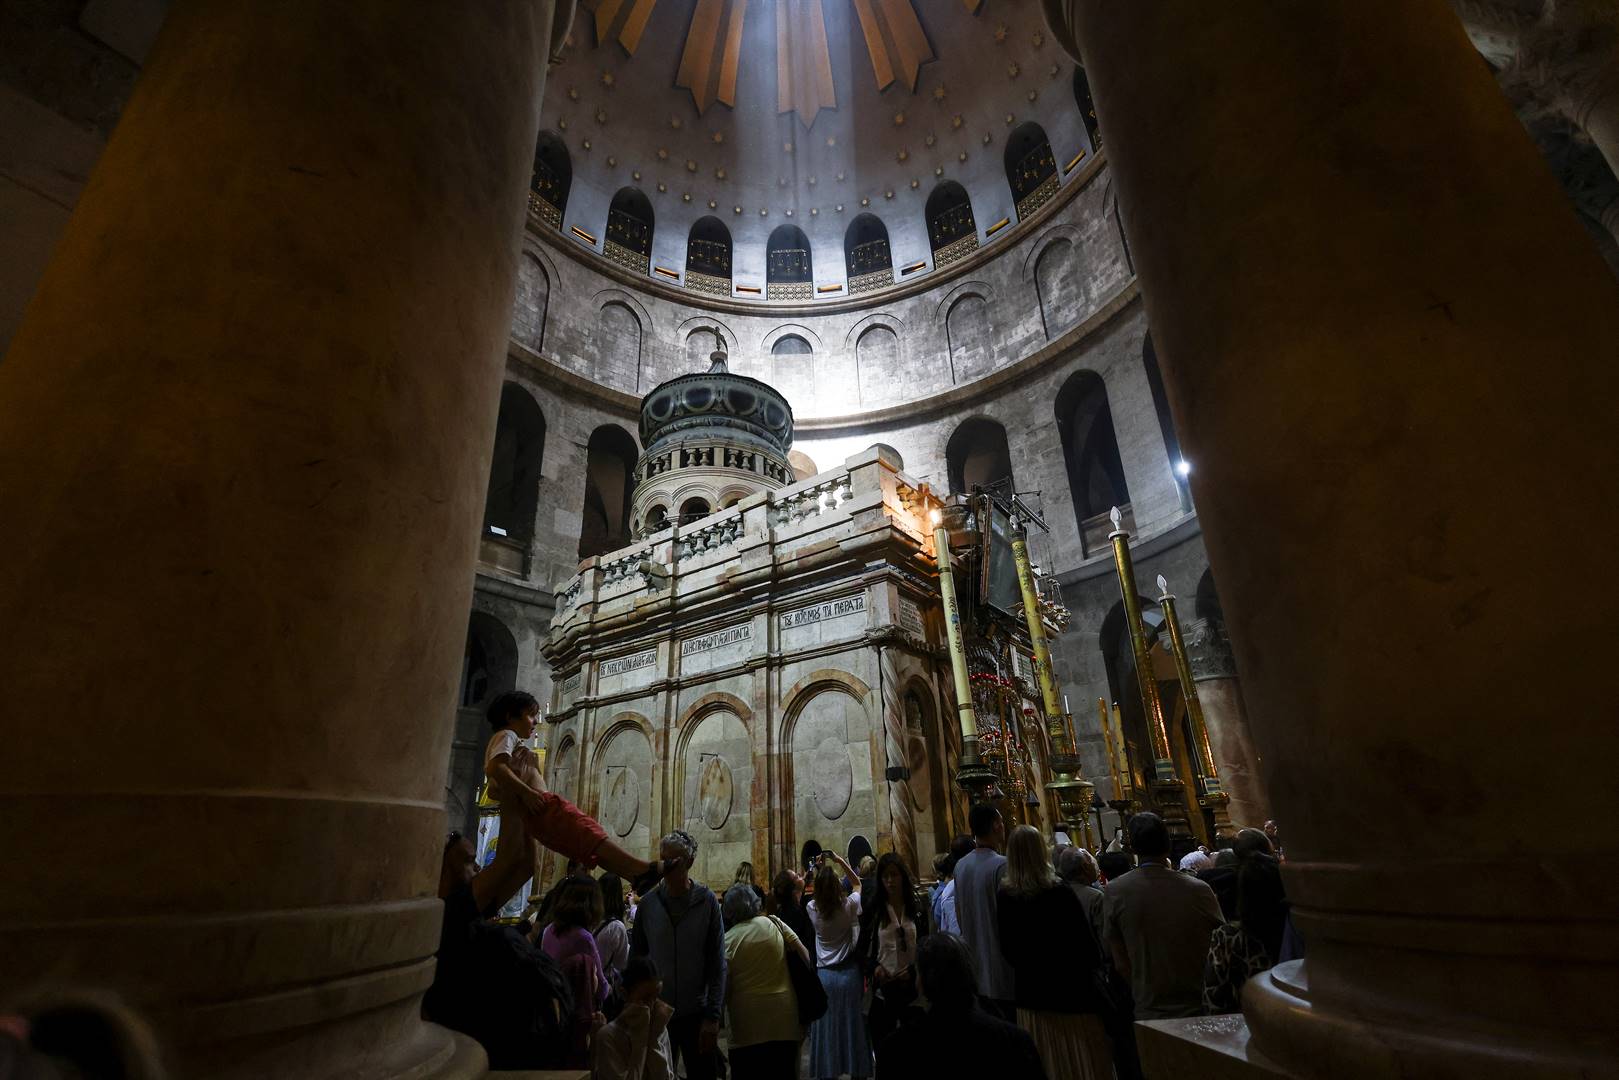 sacred placeThe Church of the Holy Sepulchre in Jerusalem, where Jesus was crucified, buried and rose from the dead is one of the main Christian attractions of the Old City